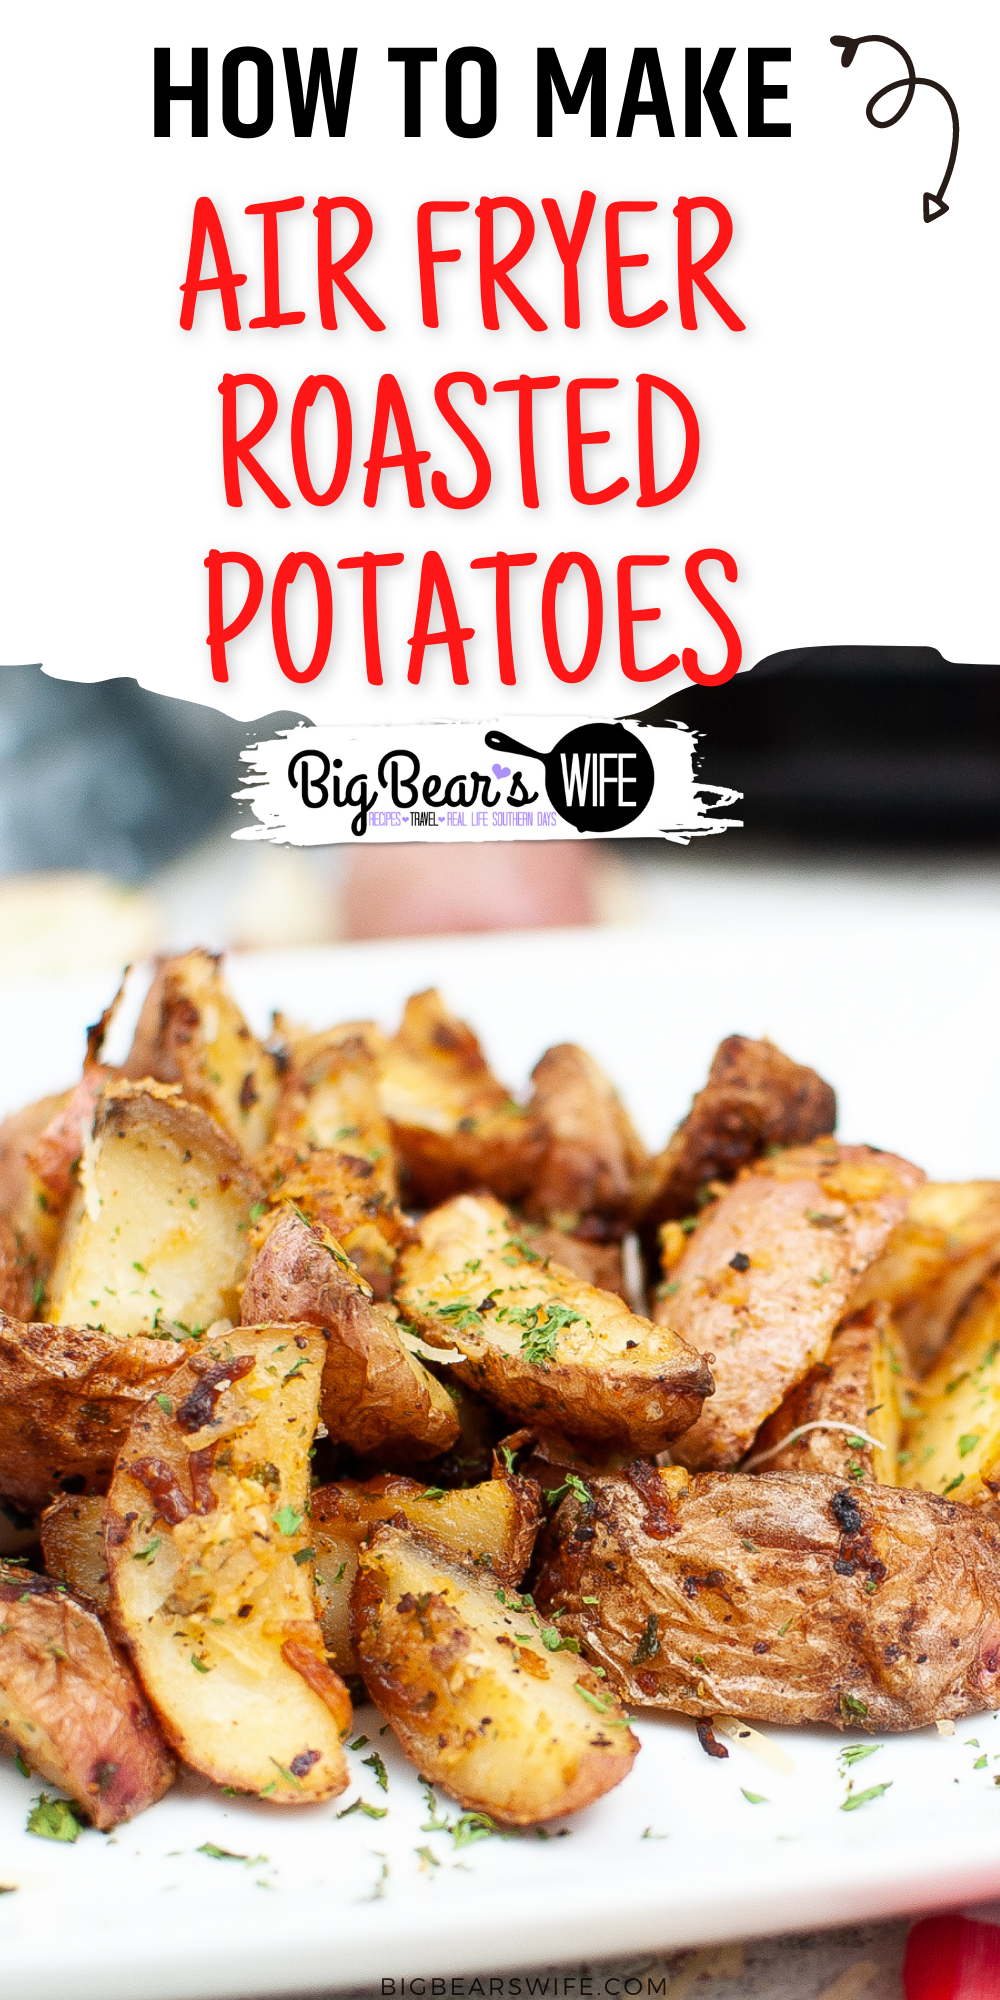 These crispy Air Fryer Roasted Potatoes take about 15 minutes to roast in the air fryer and make the perfect side dish!  via @bigbearswife